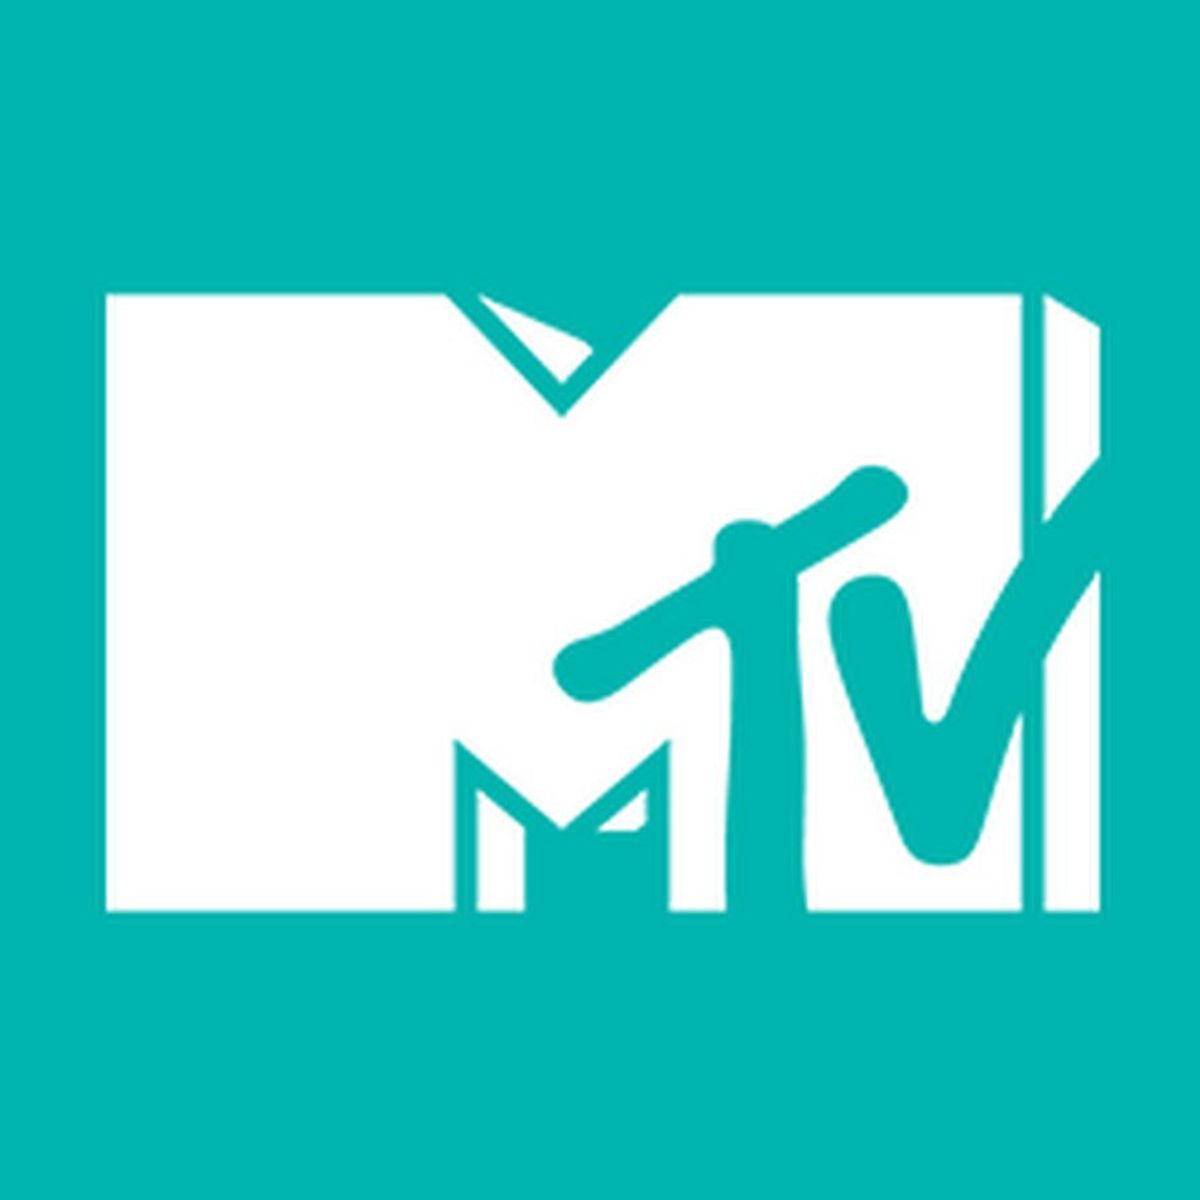 MTV Releases Racist Video Directed At White People